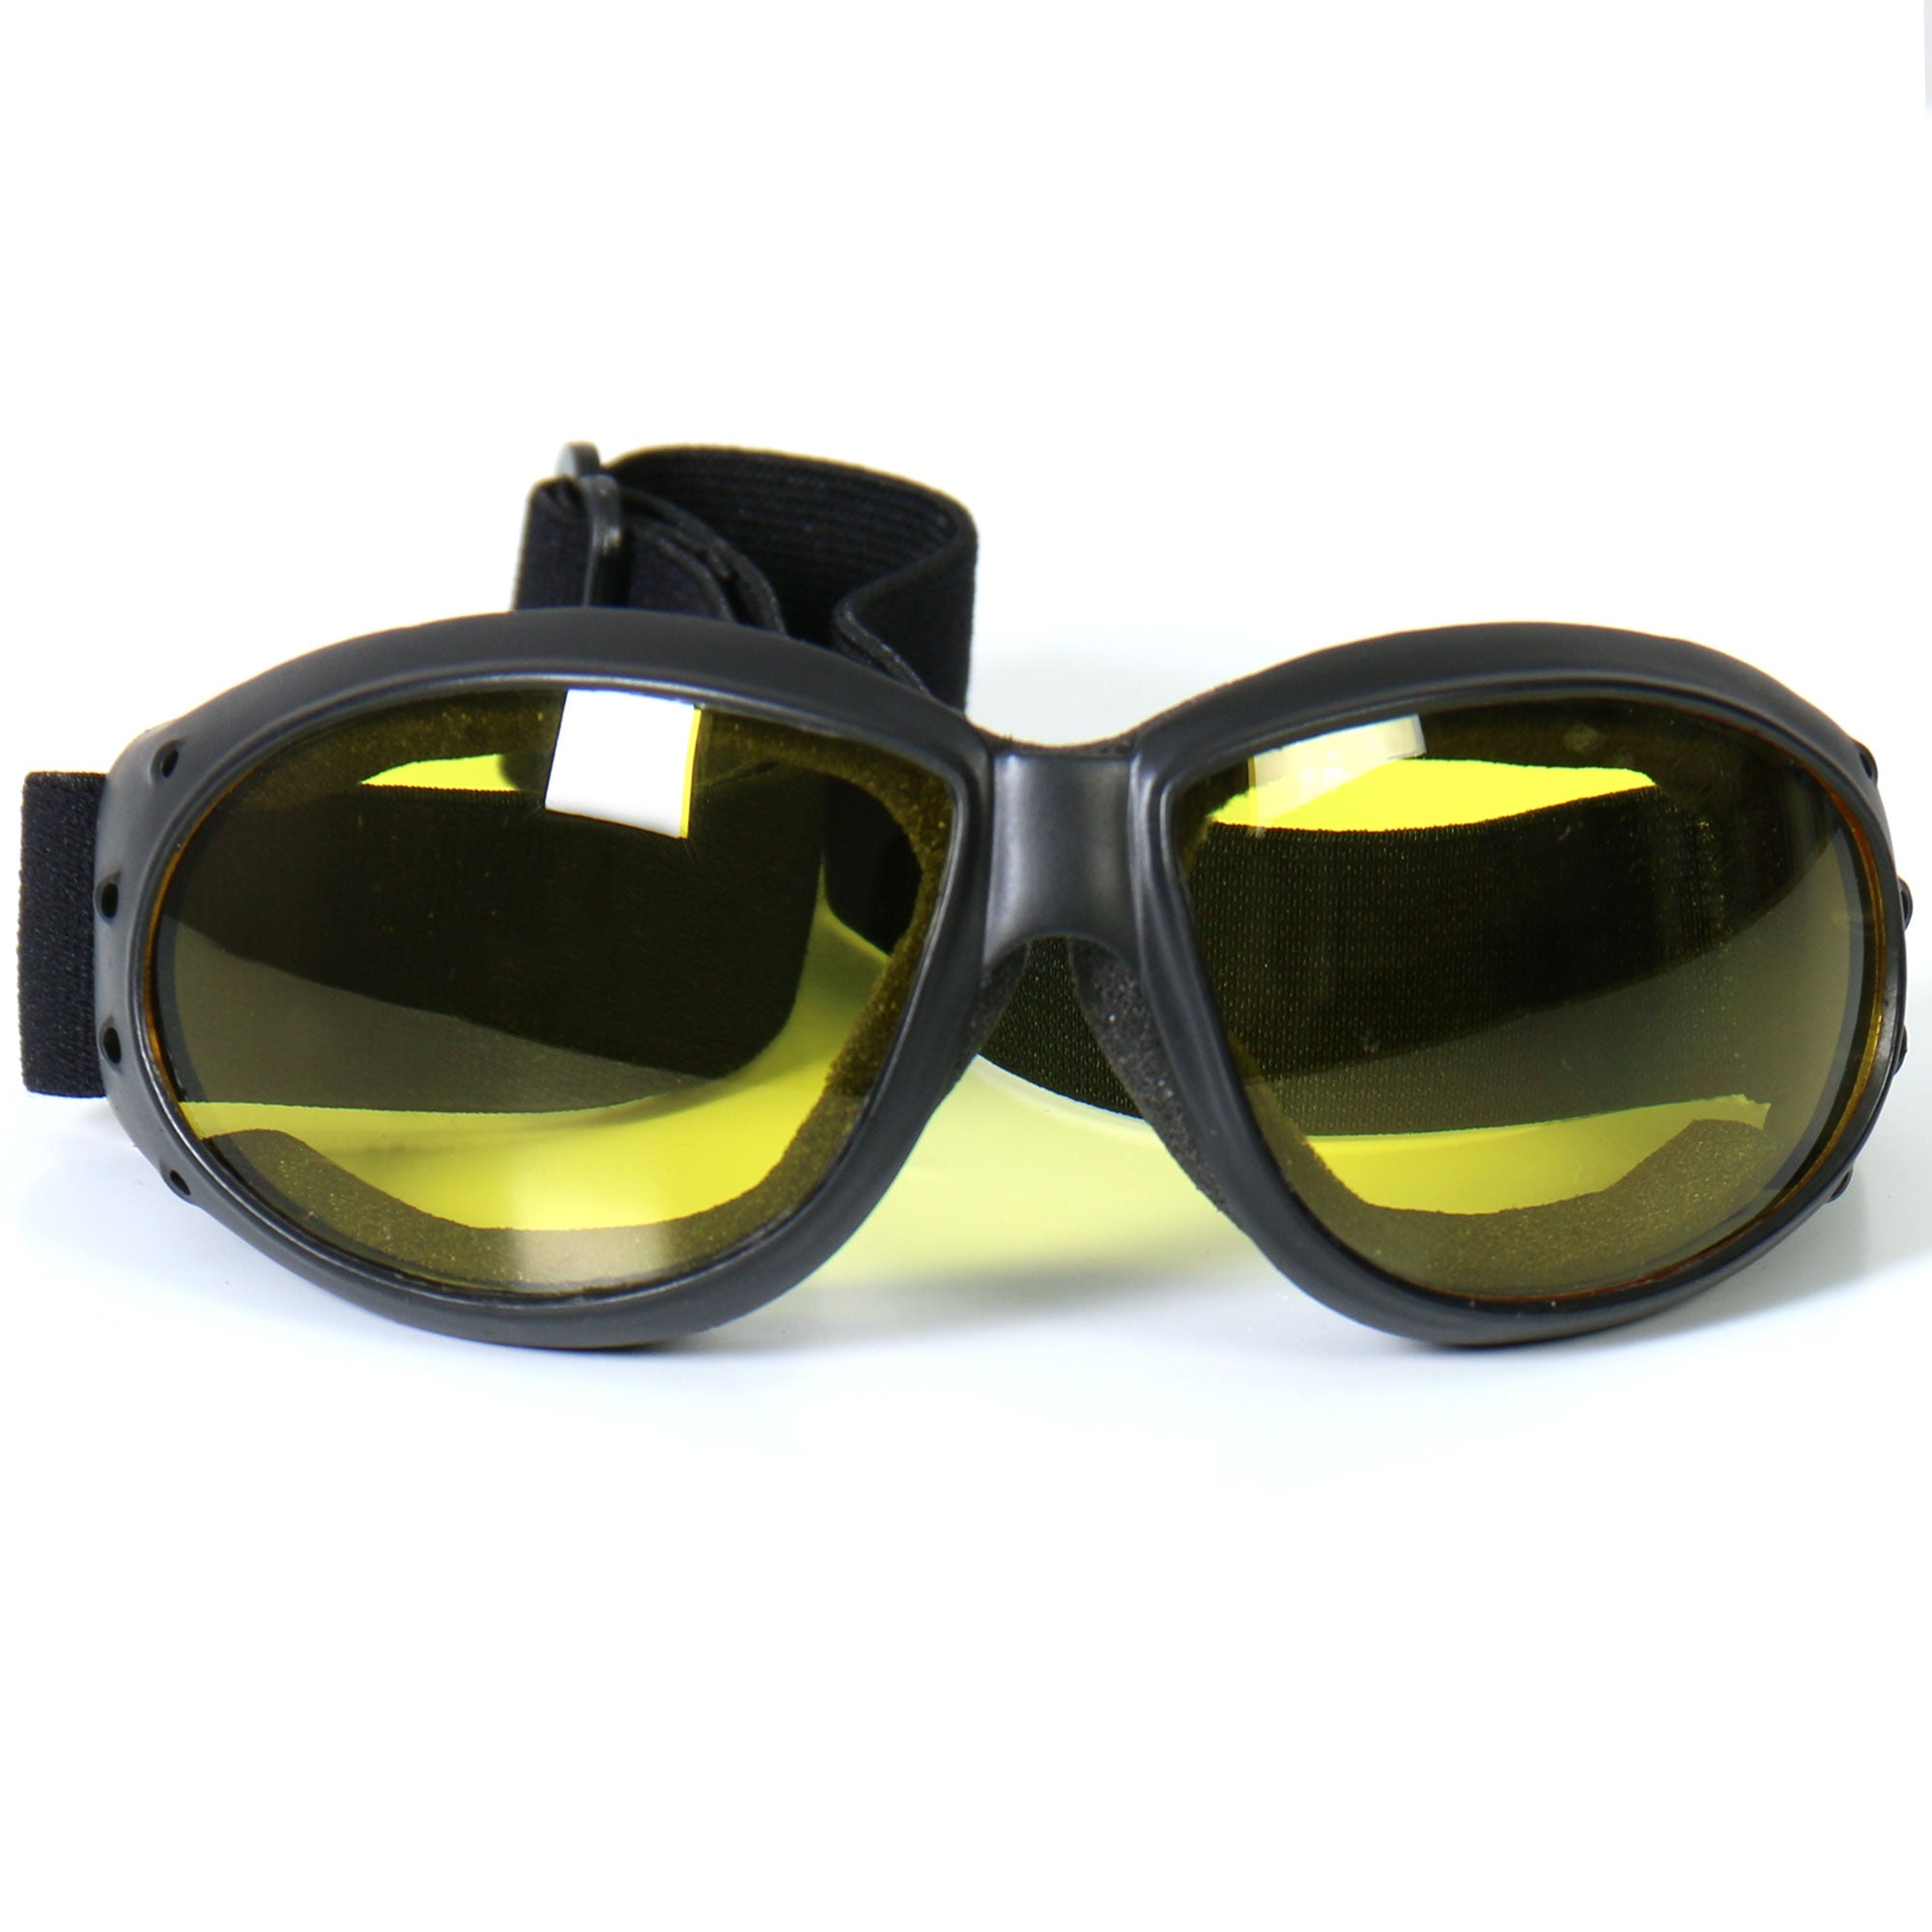 Hot Leathers SGG1007 Eliminator Style Motorcycle Riding Goggles with Yellow Lenses